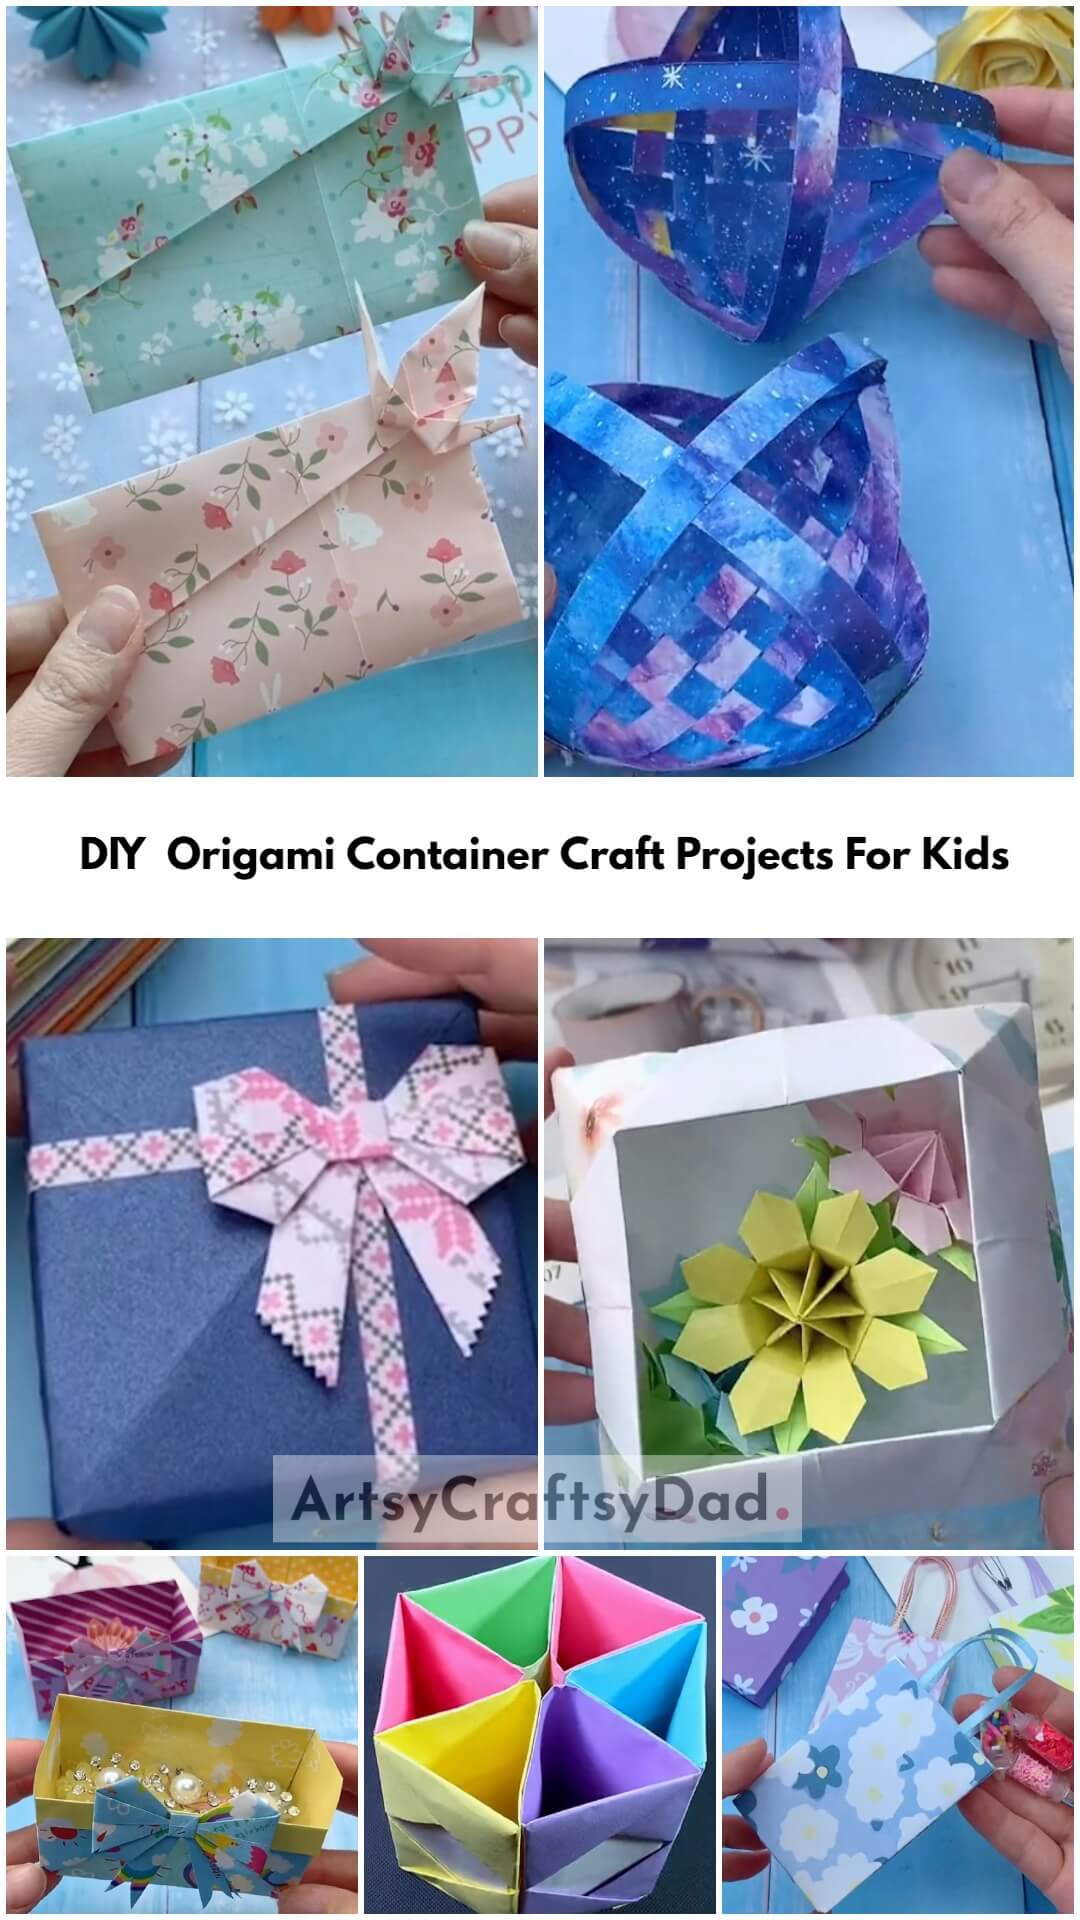 DIY & Creative Origami Container Craft Projects For Kids